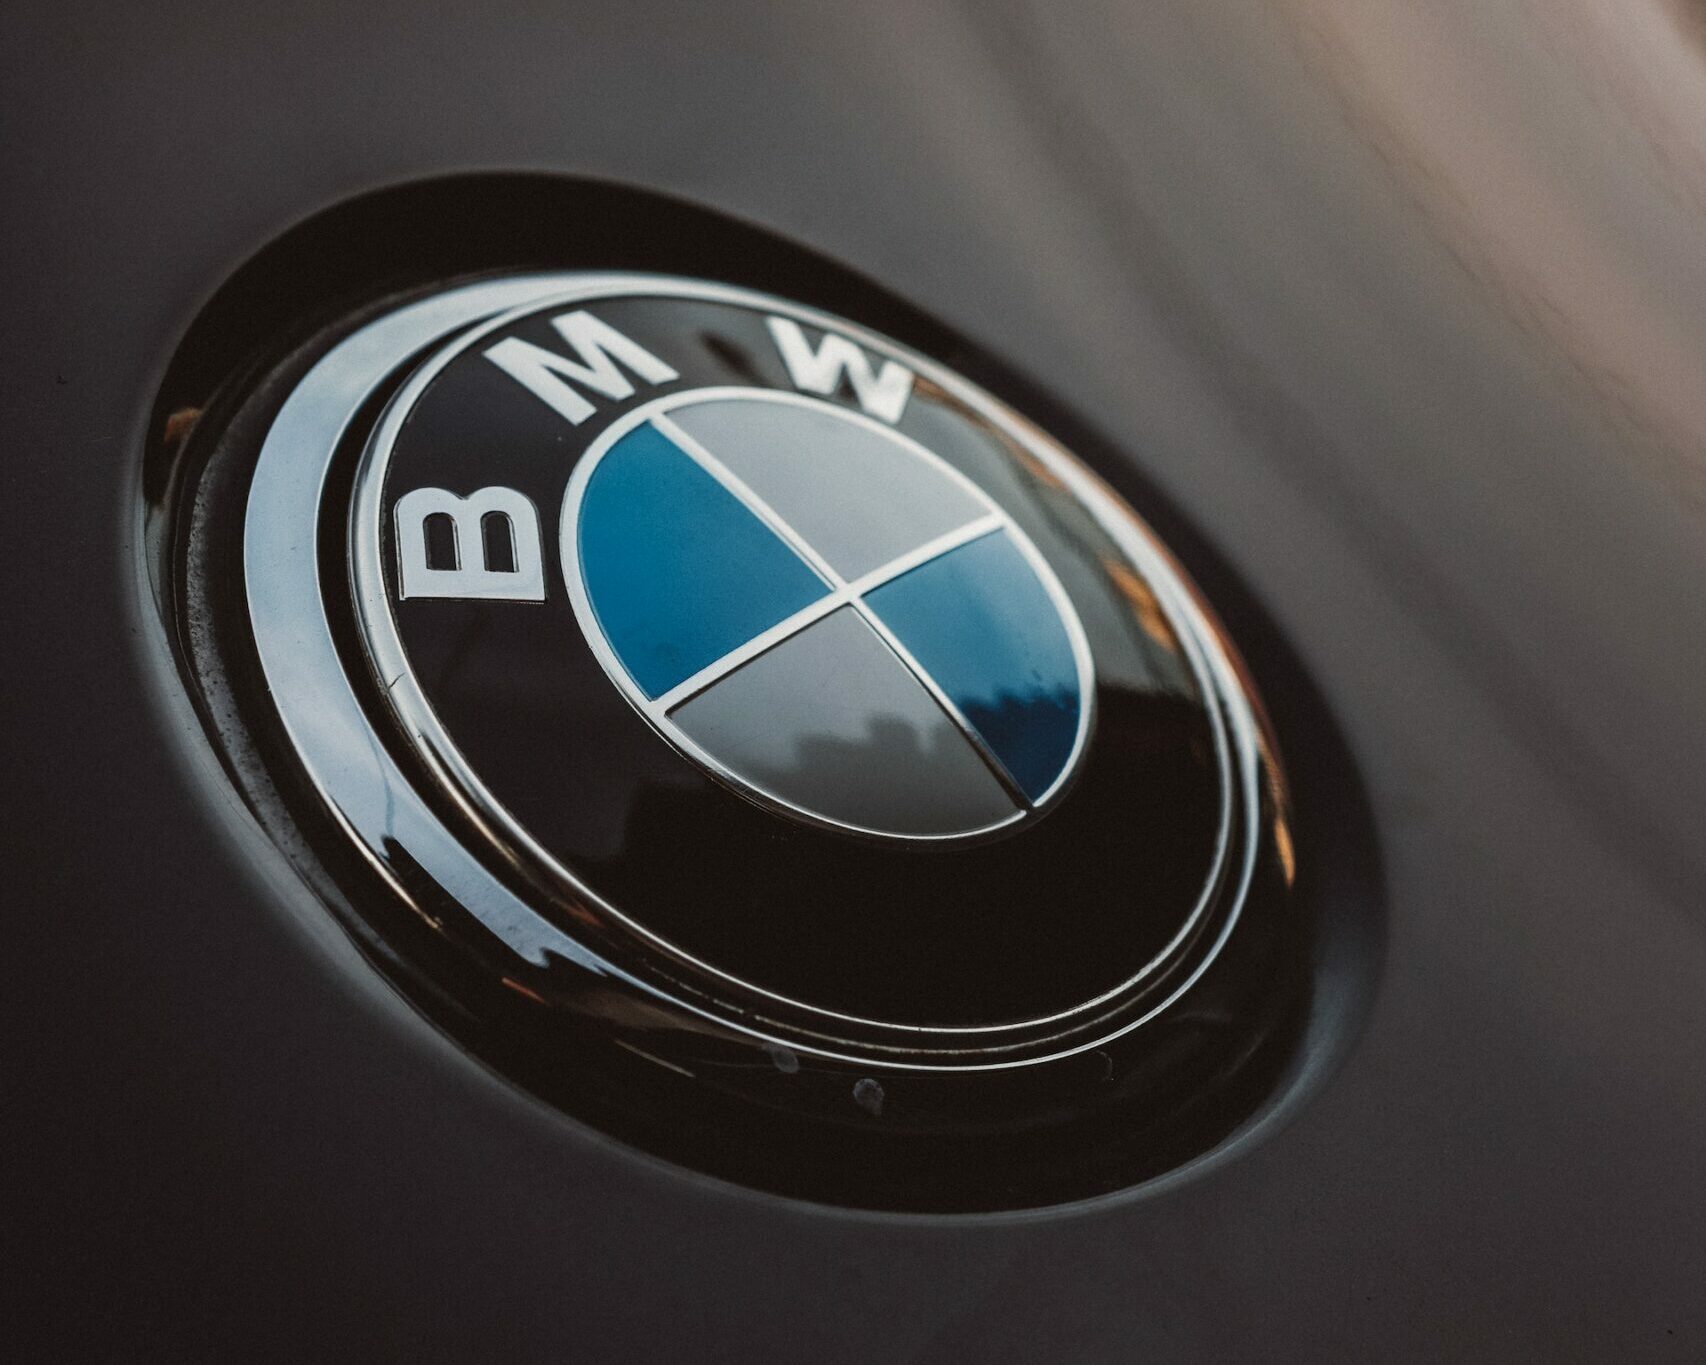 Diesel BMW Owners Could Receive Compensation, Experts Claim